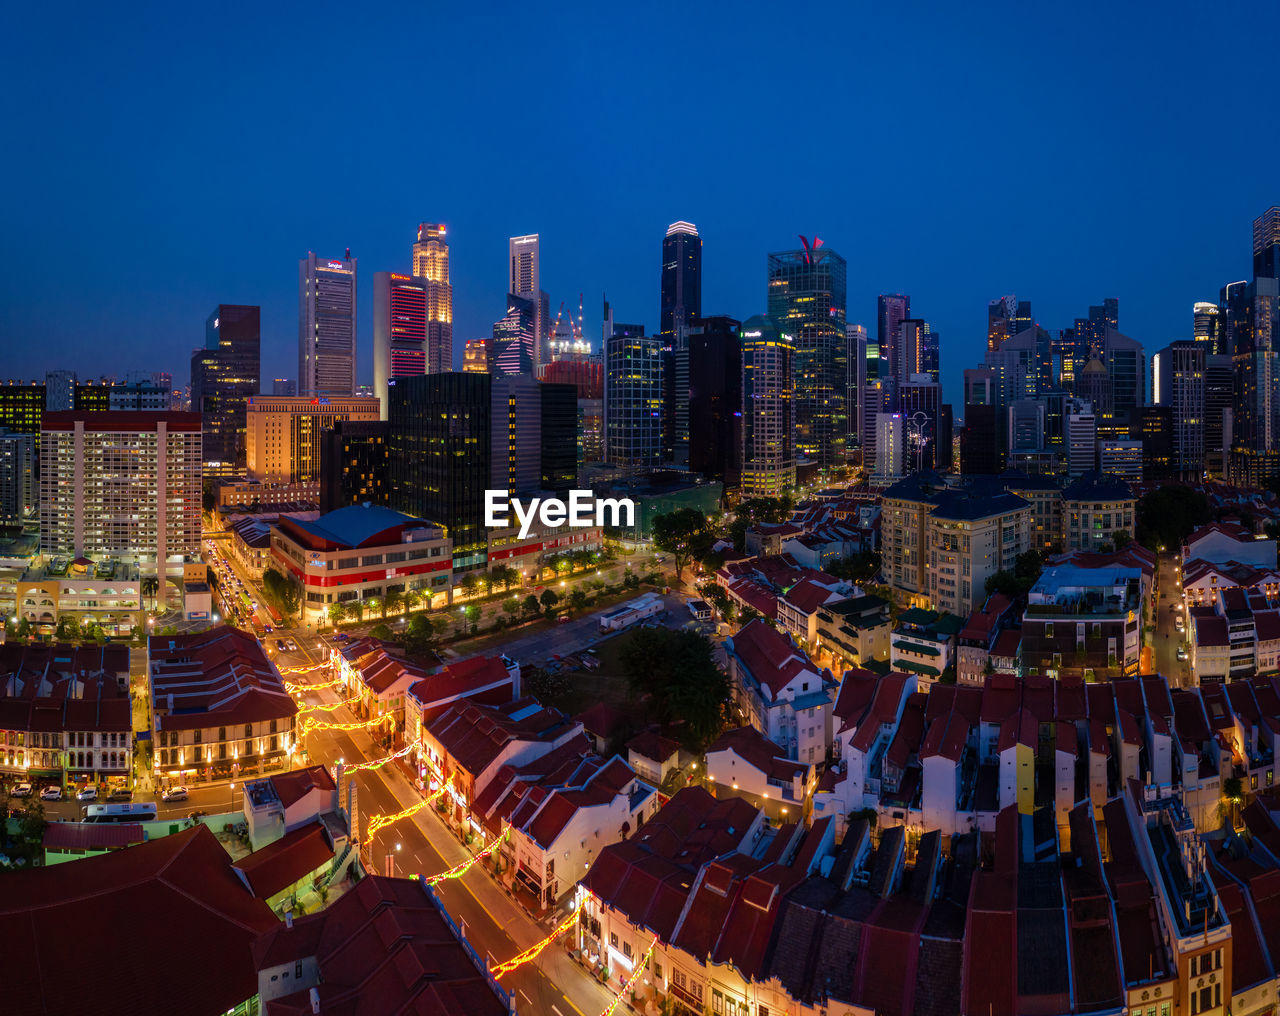 Aerial view of illuminated chinatown buildings in singapore city at night